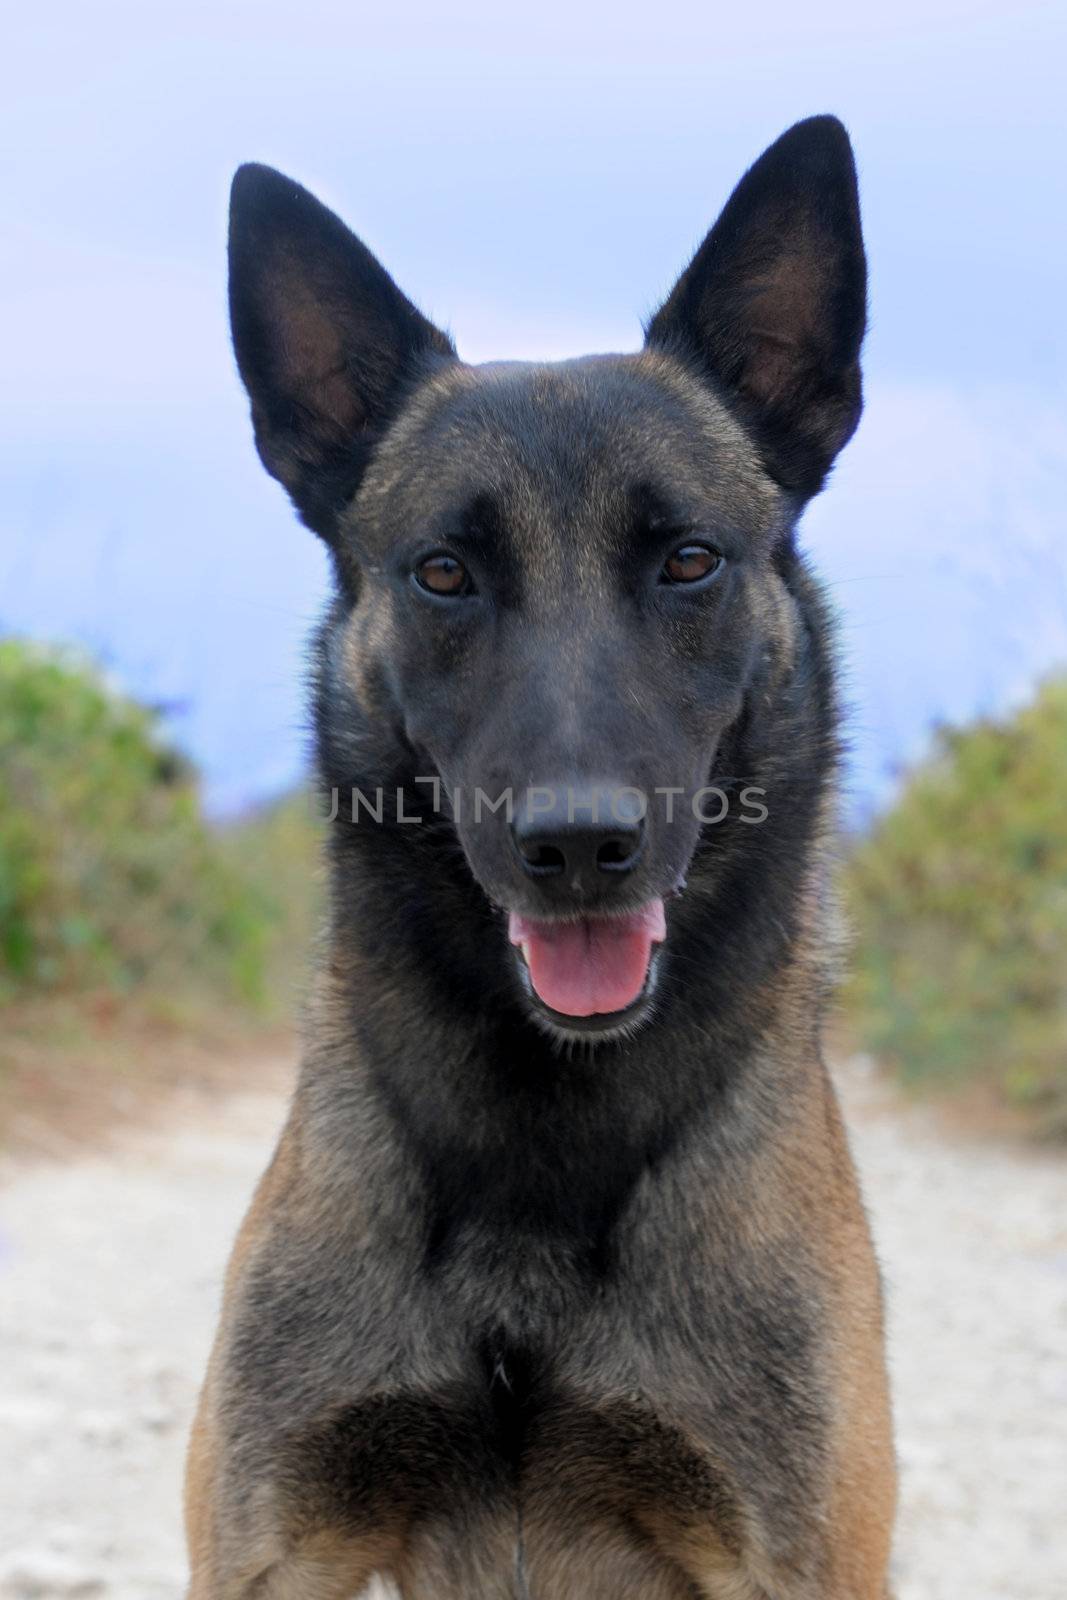 picture of a purebred belgian sheepdog malinois